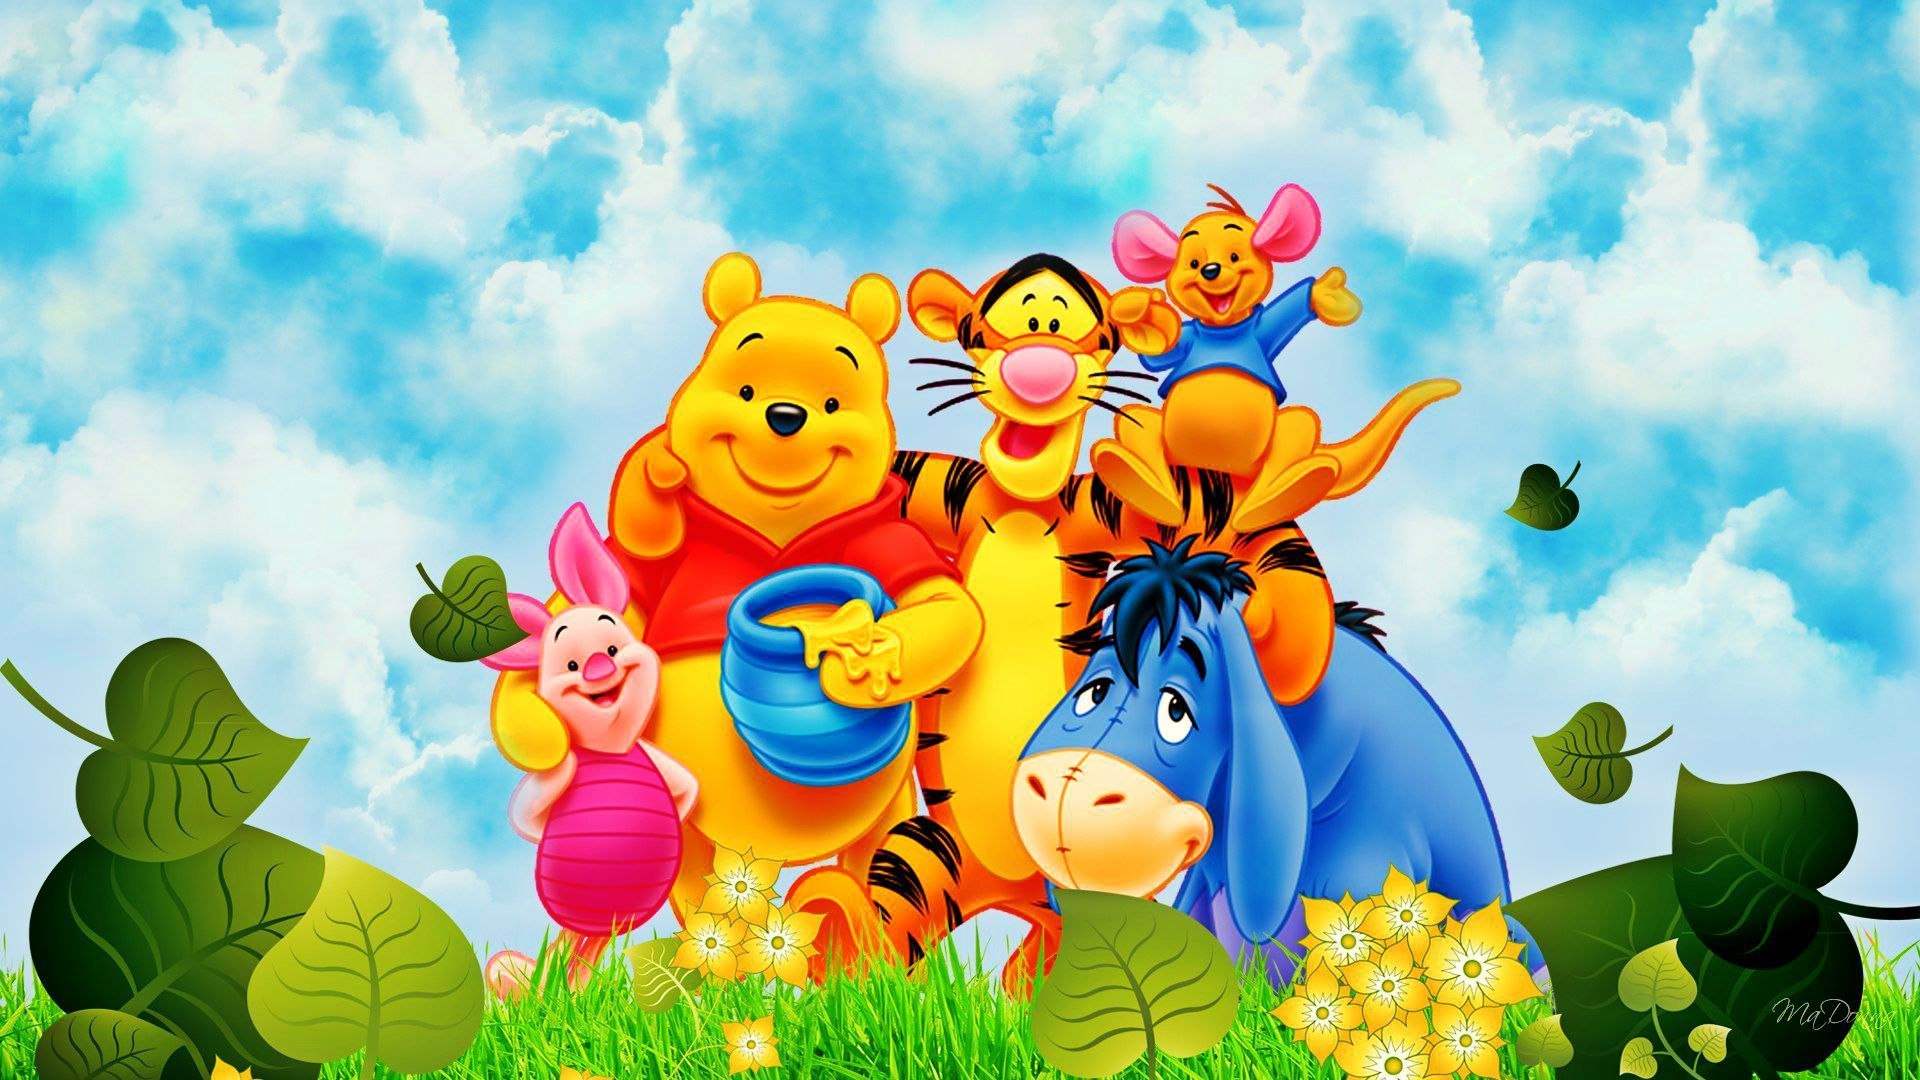 Winnie The Pooh Looking For Honey Cartoon Image Wallpaper Hd 1920x1200   Wallpapers13com